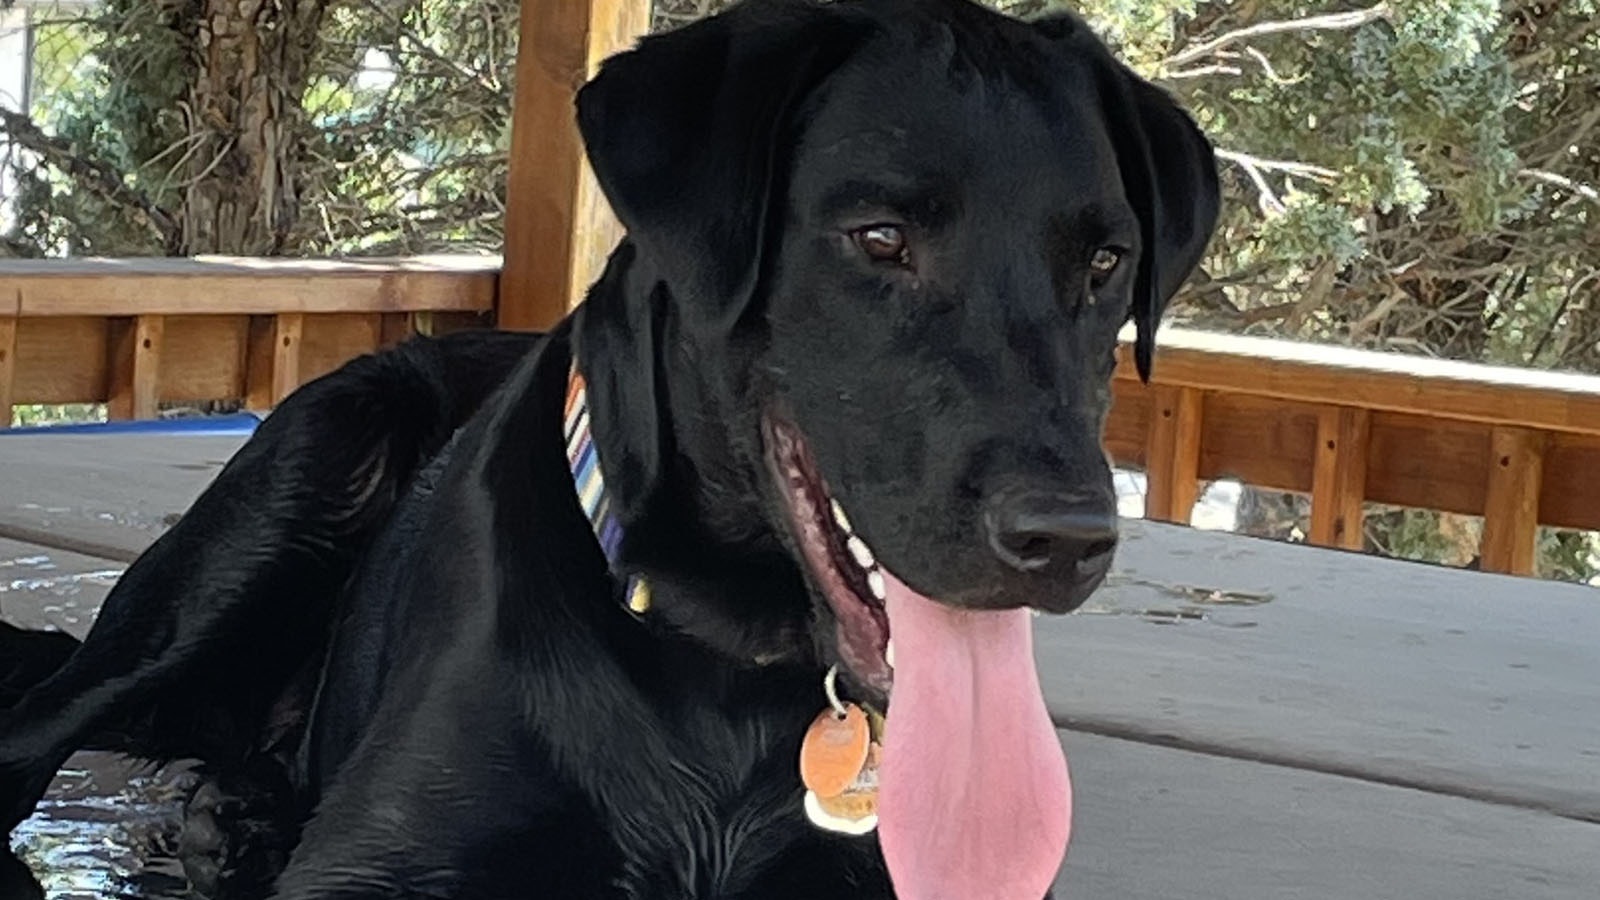 Tator, a black Labrador retriever, got sick when he somehow ingested meth while on an outing at Dalbey Memorial Park in Gillette.